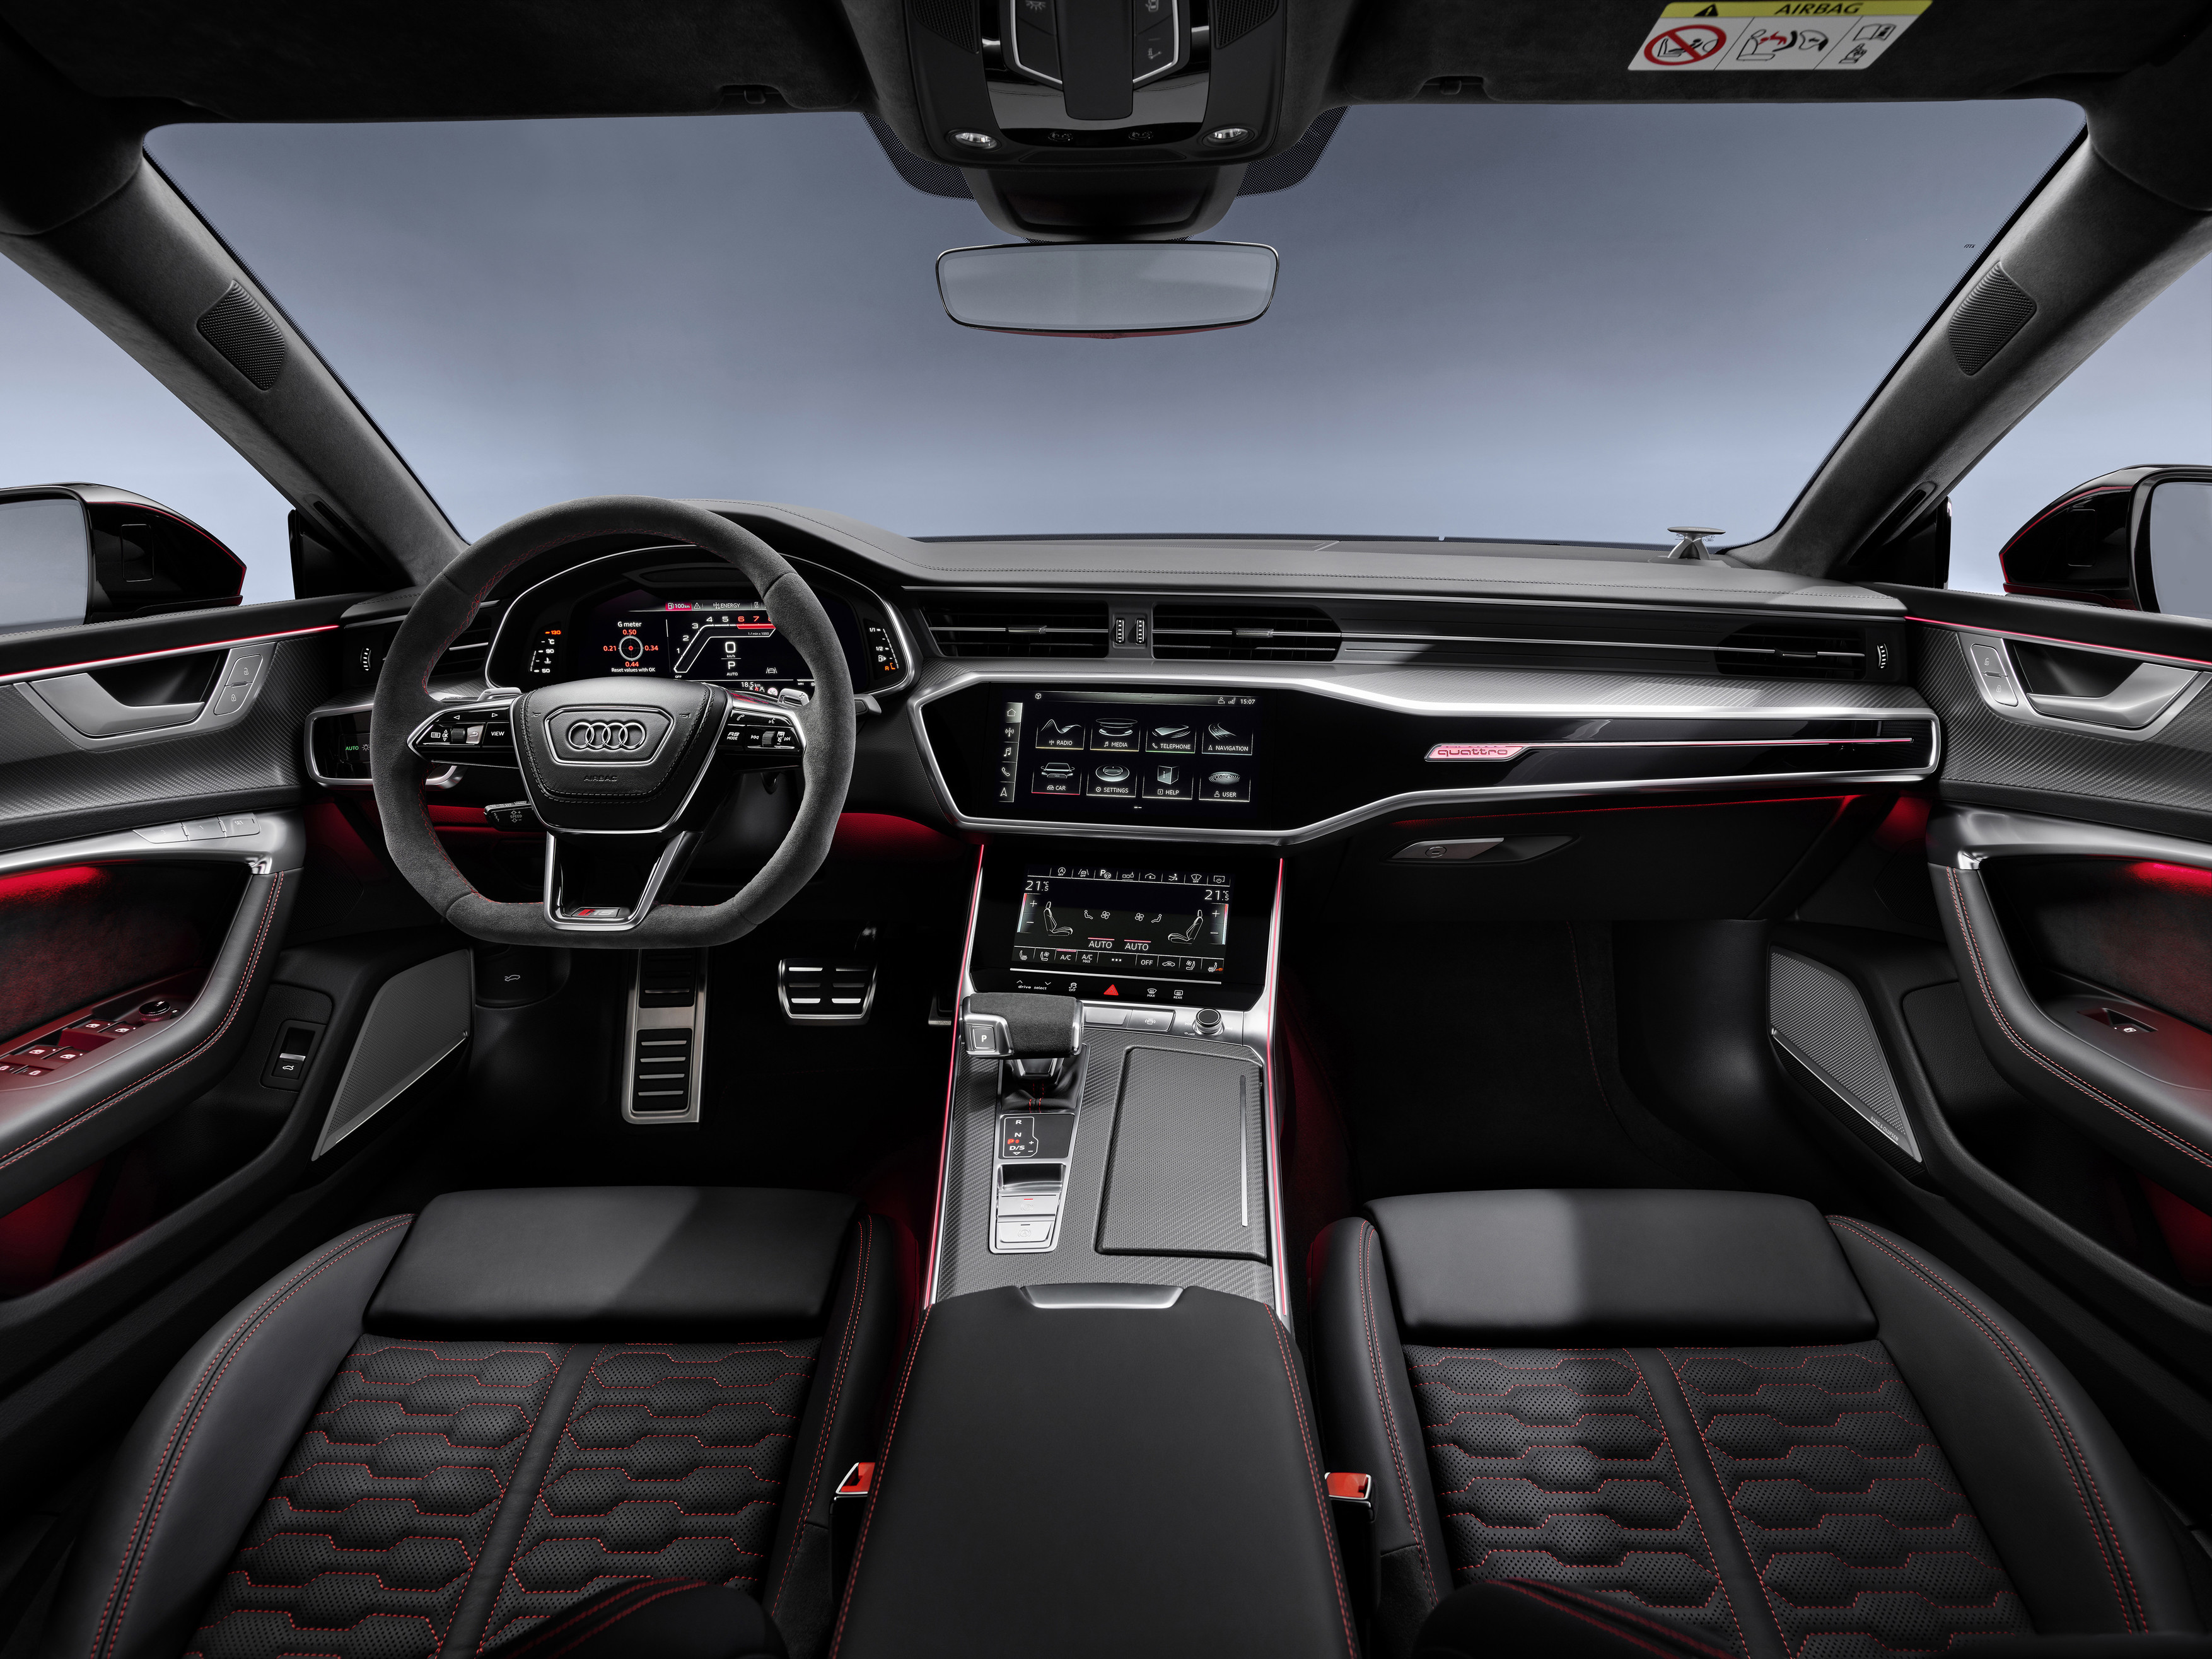 The RS 7's cabin gets sports seats and a flat-bottomed steering wheel